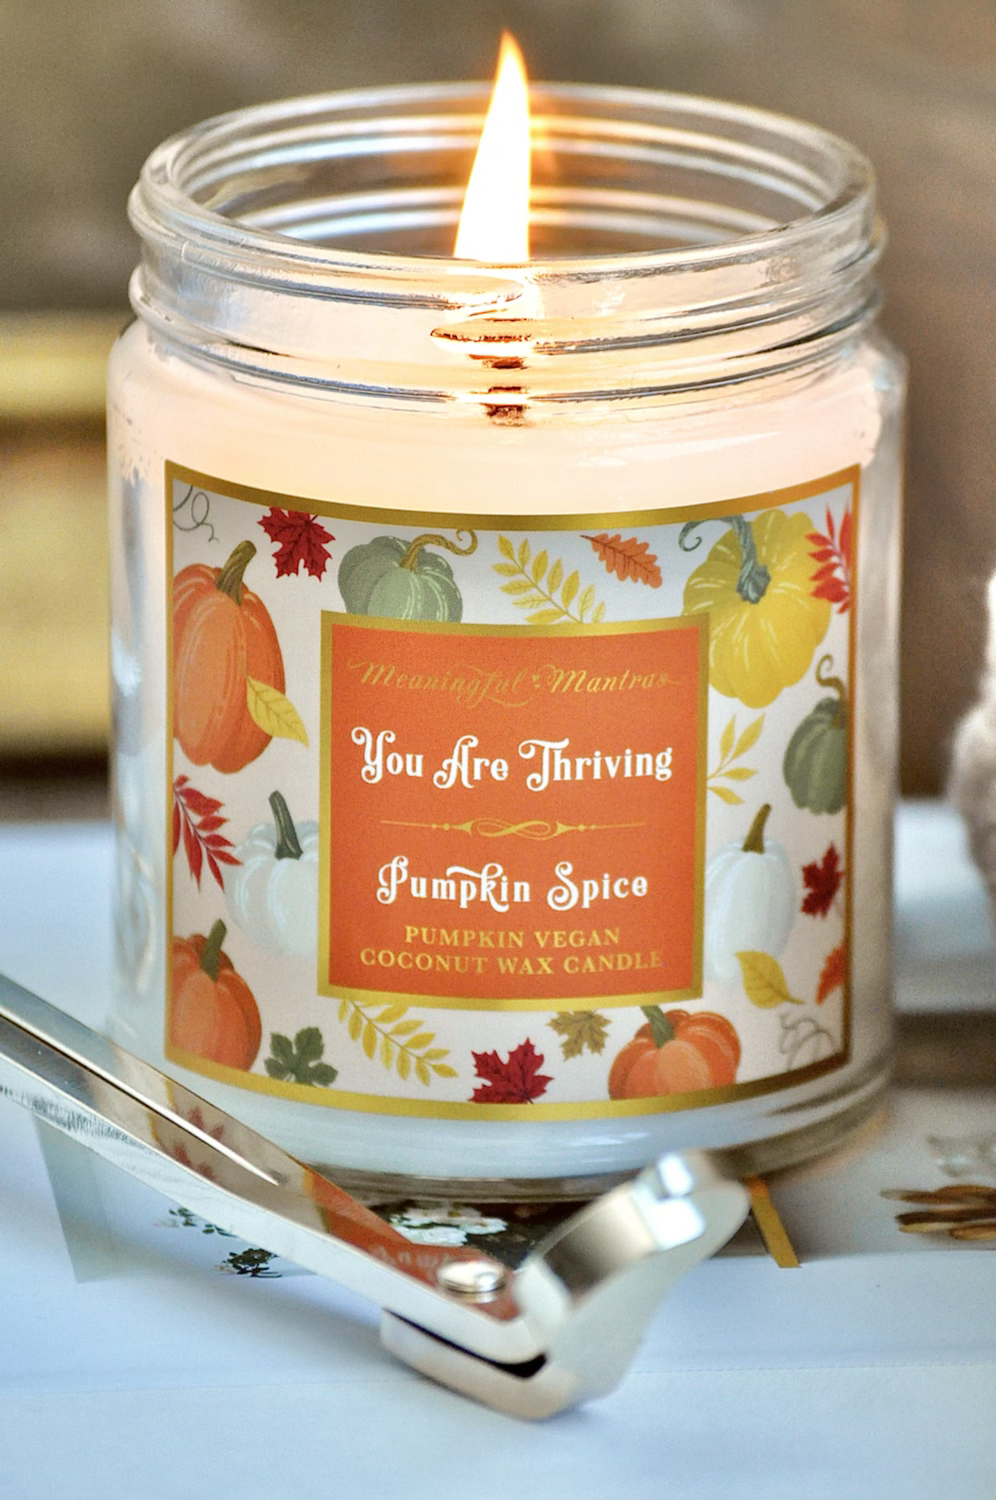 You Are Thriving Pumpkin Spice 8oz Candle